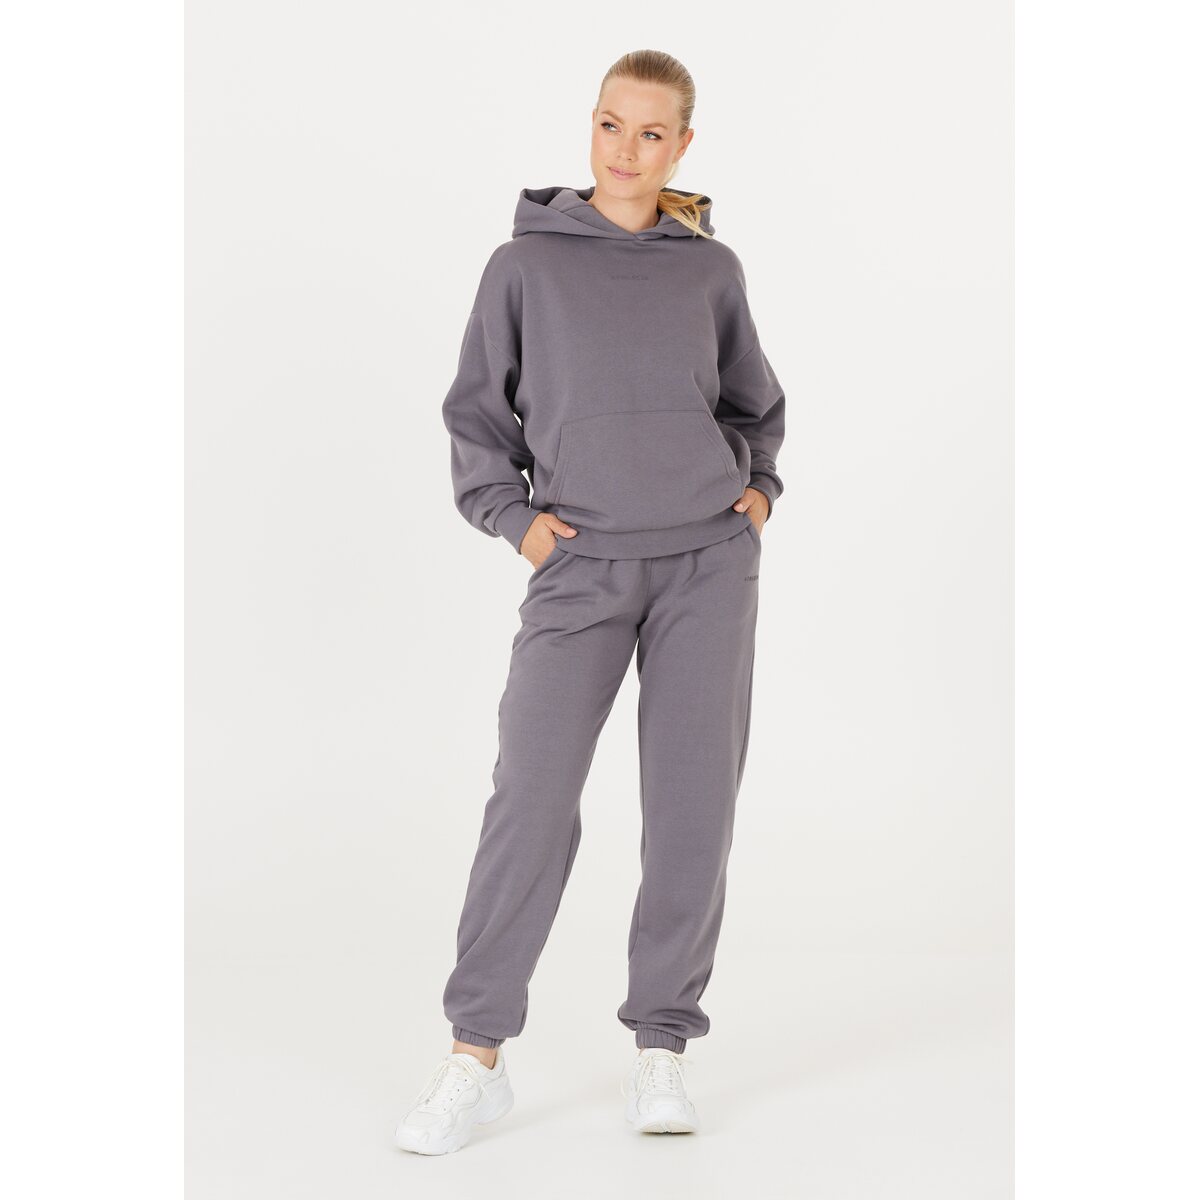 Athlecia Ruthie Womenswear Sweat Pants 1 Shaws Department Stores